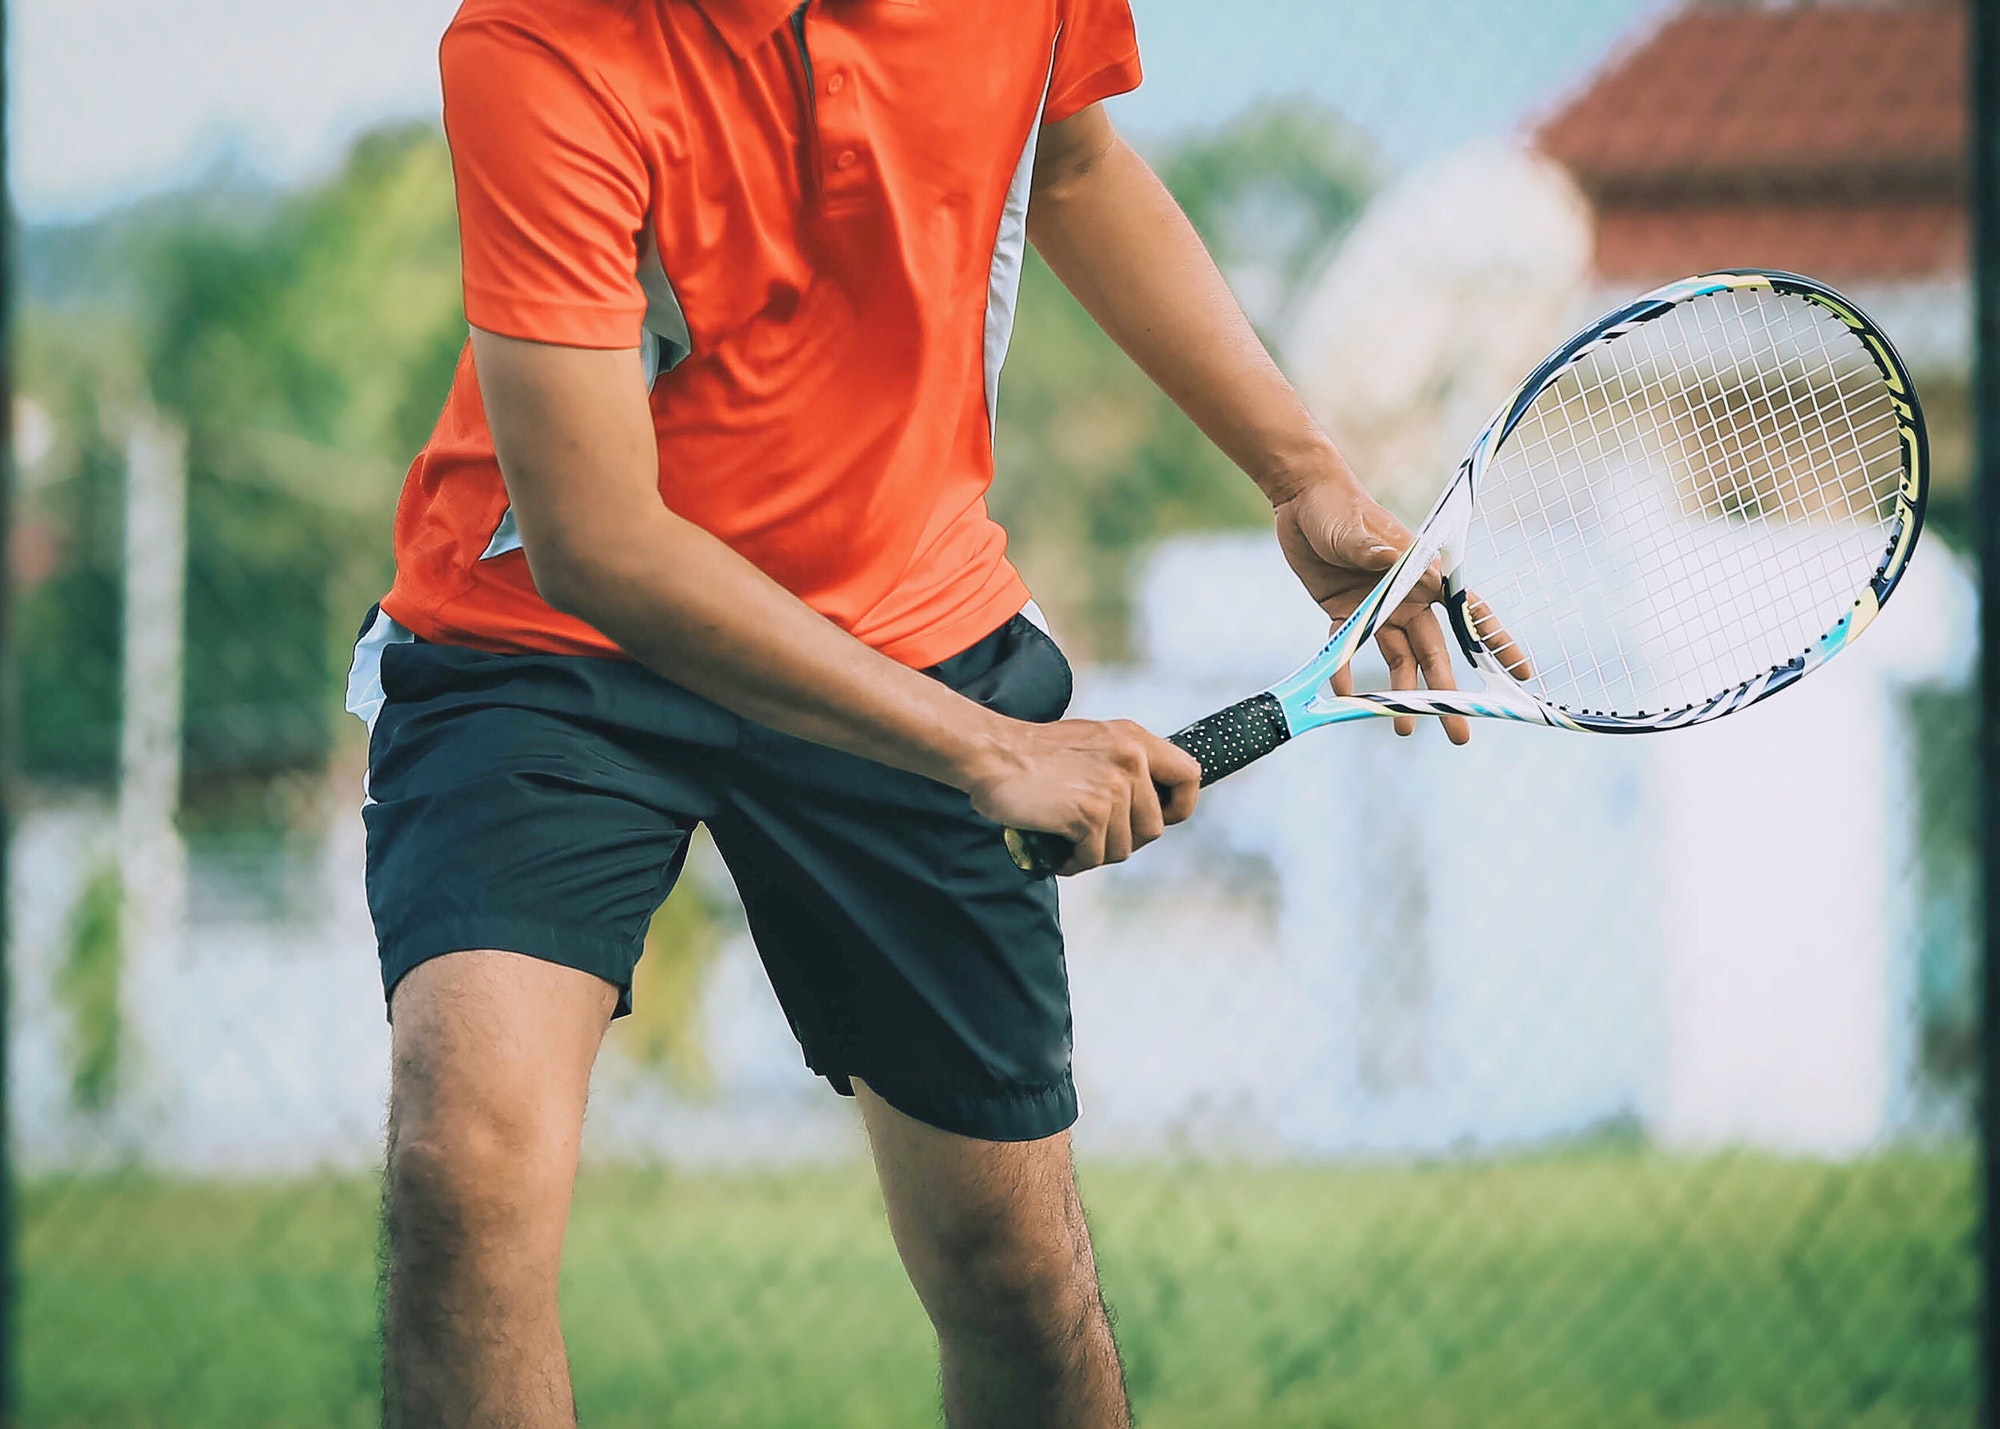 Ways to Enjoy Tennis Even if You Are Not that Good at It